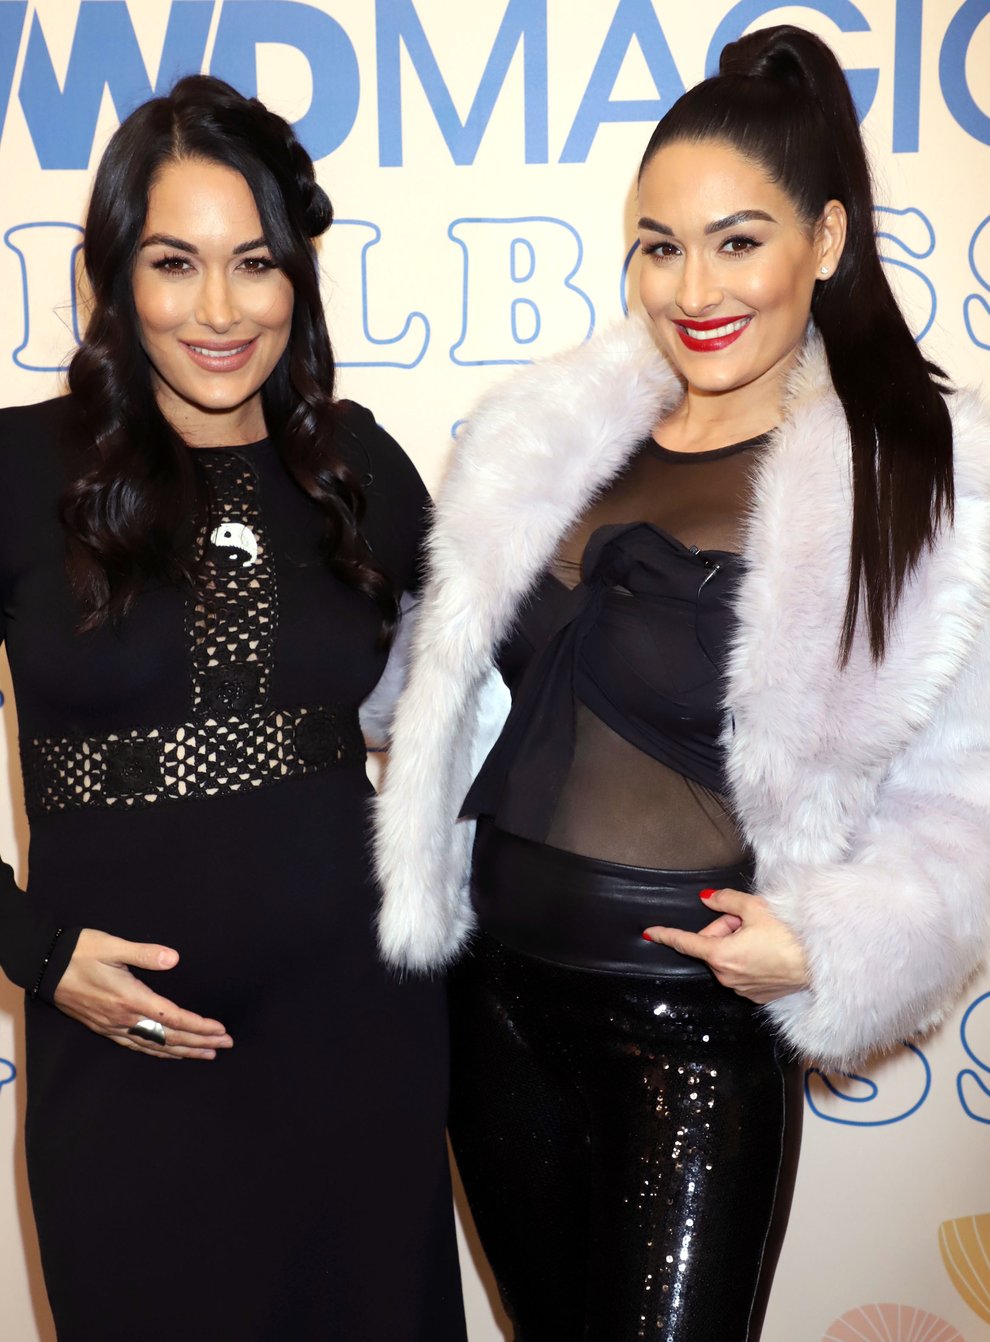 Identical twins Brie and Nikki Bella have given birth just a day apart 